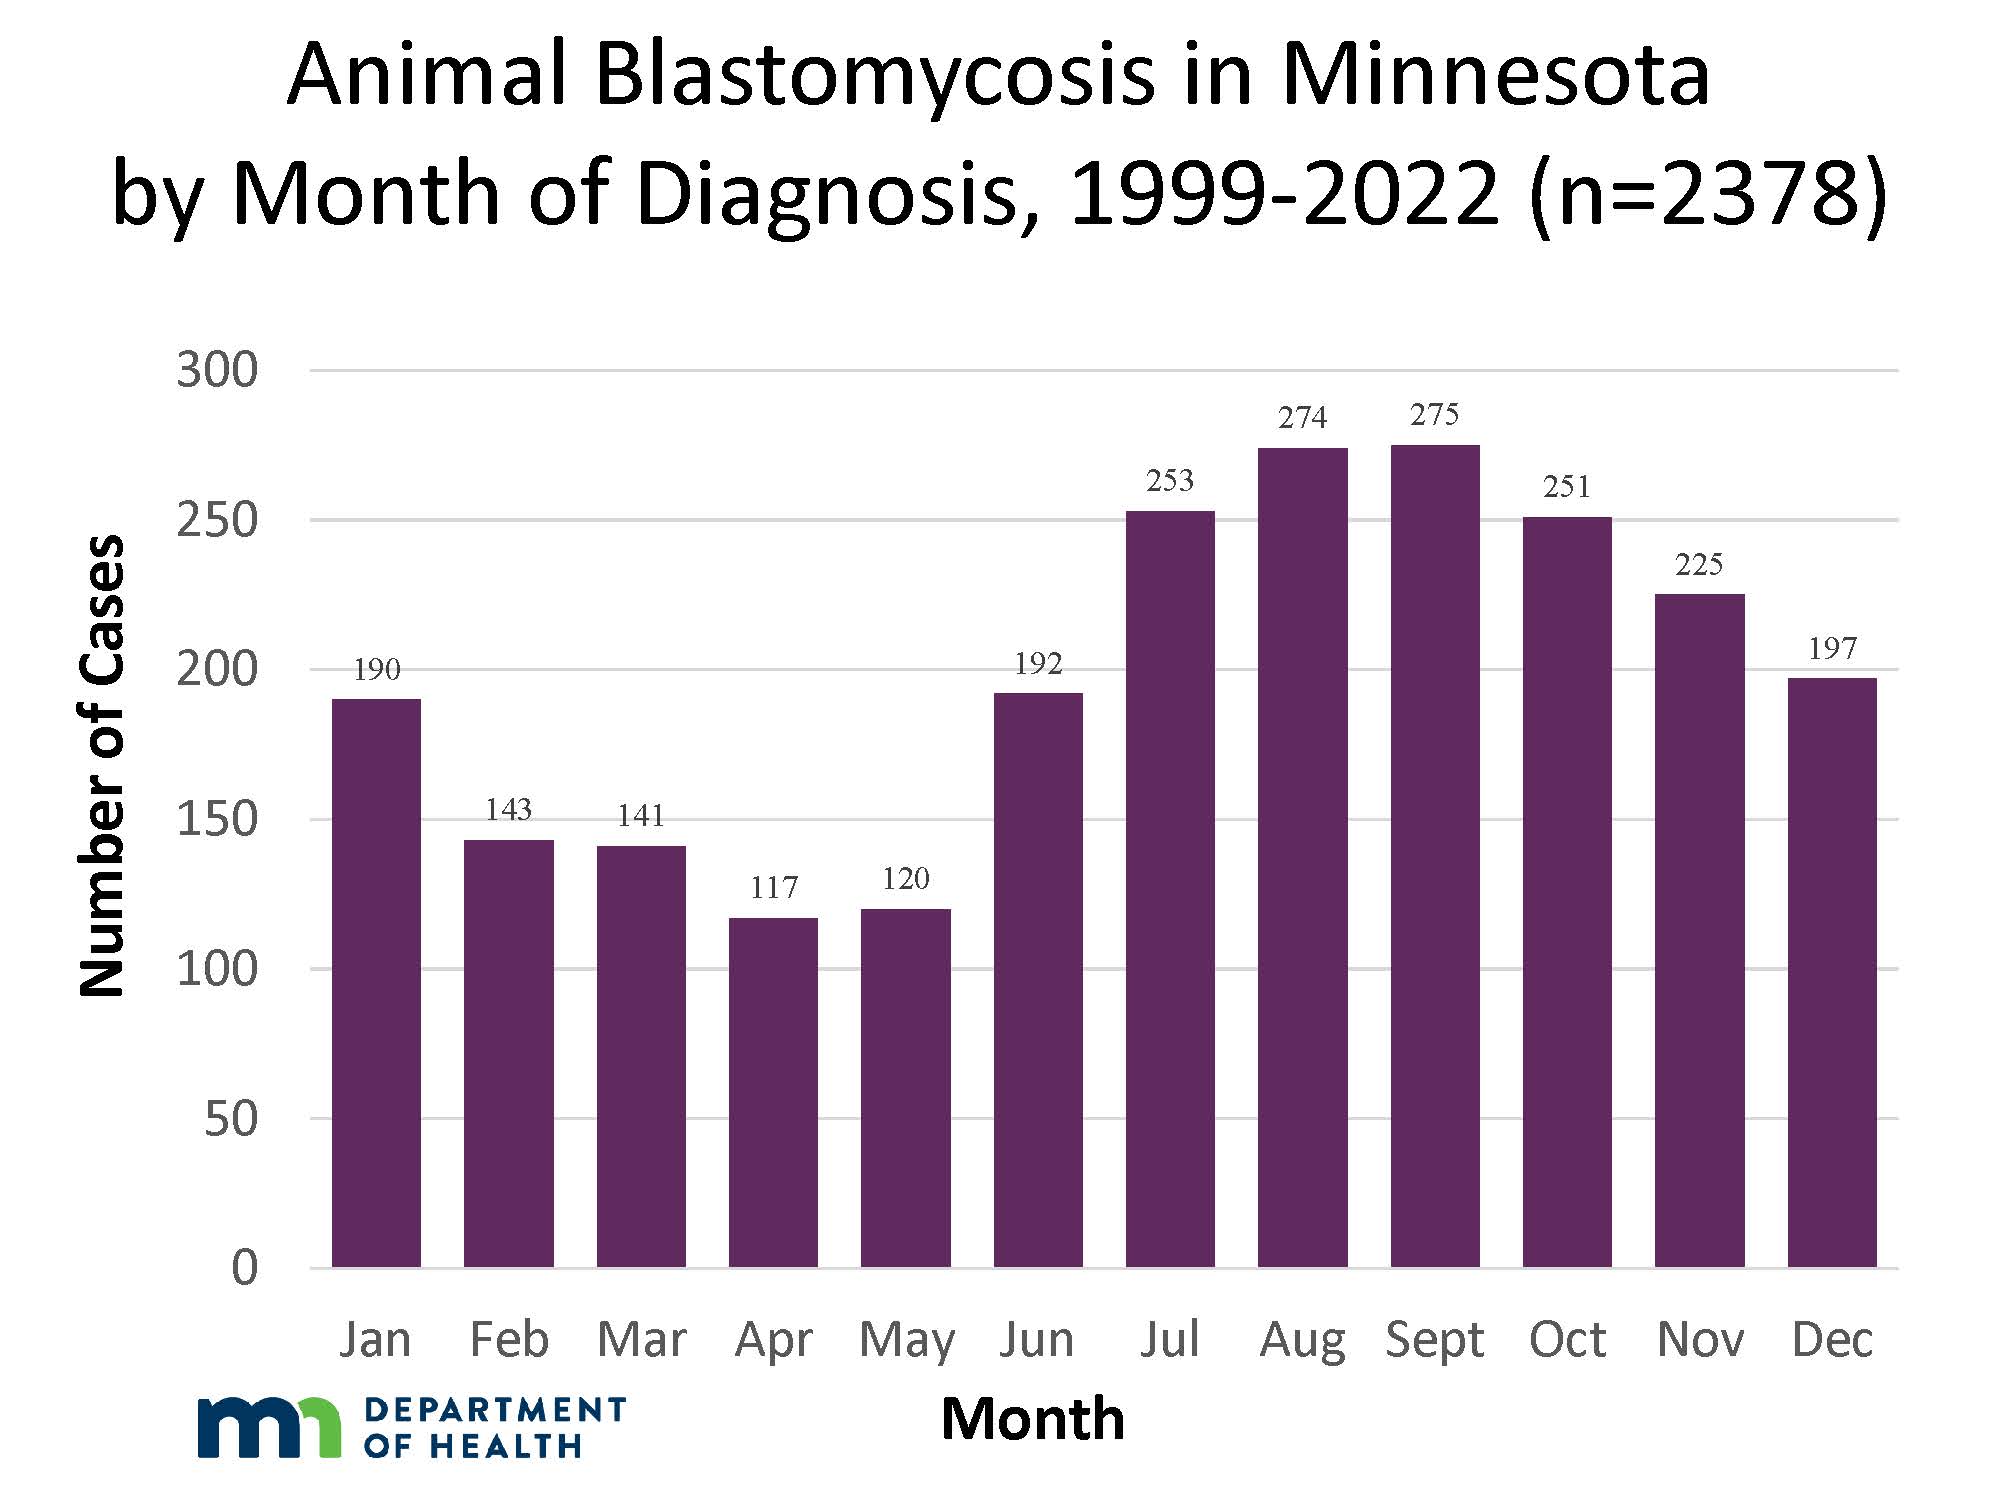 Graph of Animal Blastomycosis in Minnesota by Month of Diagnosis